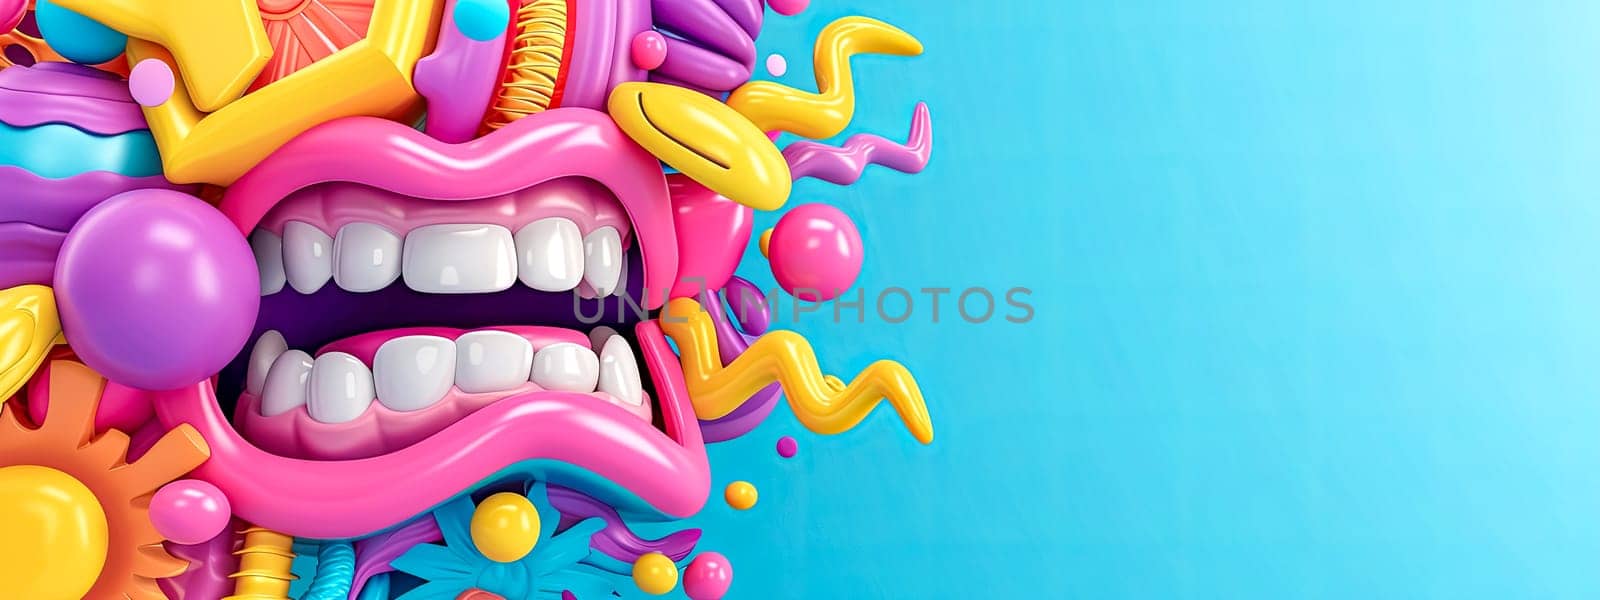 Surreal mouth with vibrant lips and whimsical 3D elements on a blue backdrop. copy space by Edophoto